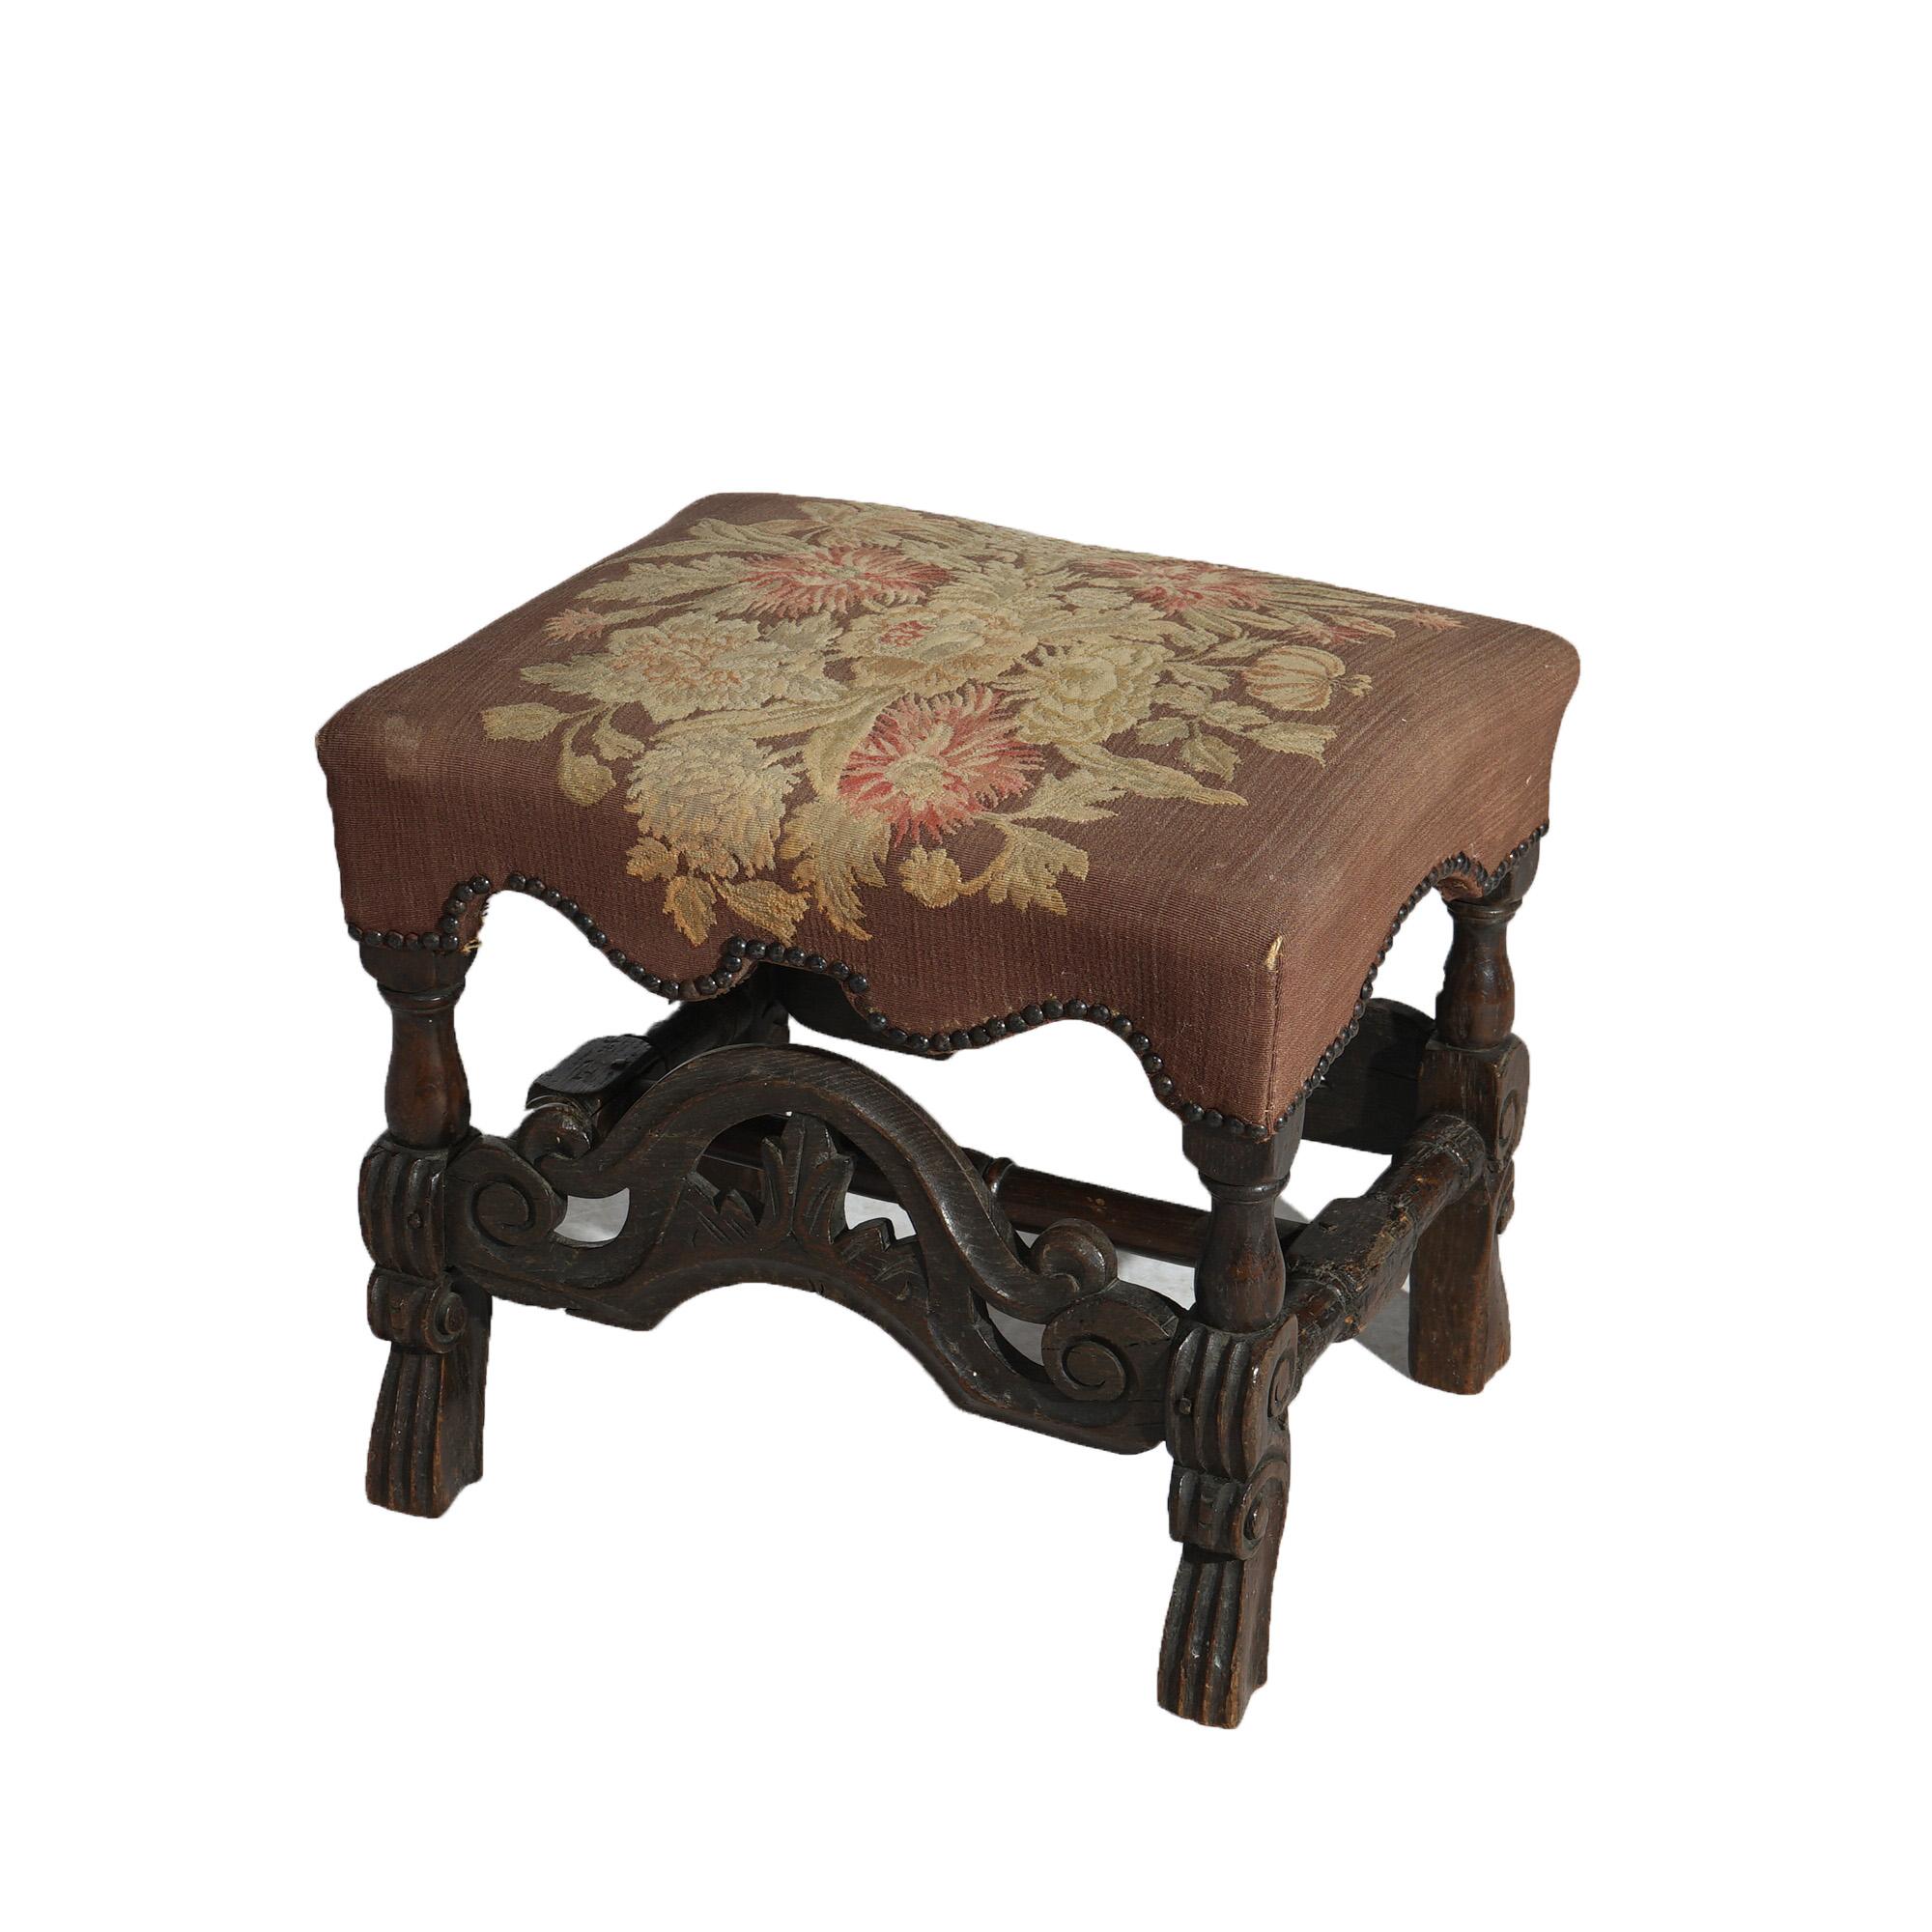 Early Antique English Carved Walnut & Needlepoint Bench (Stool) Circa 1690 For Sale 9